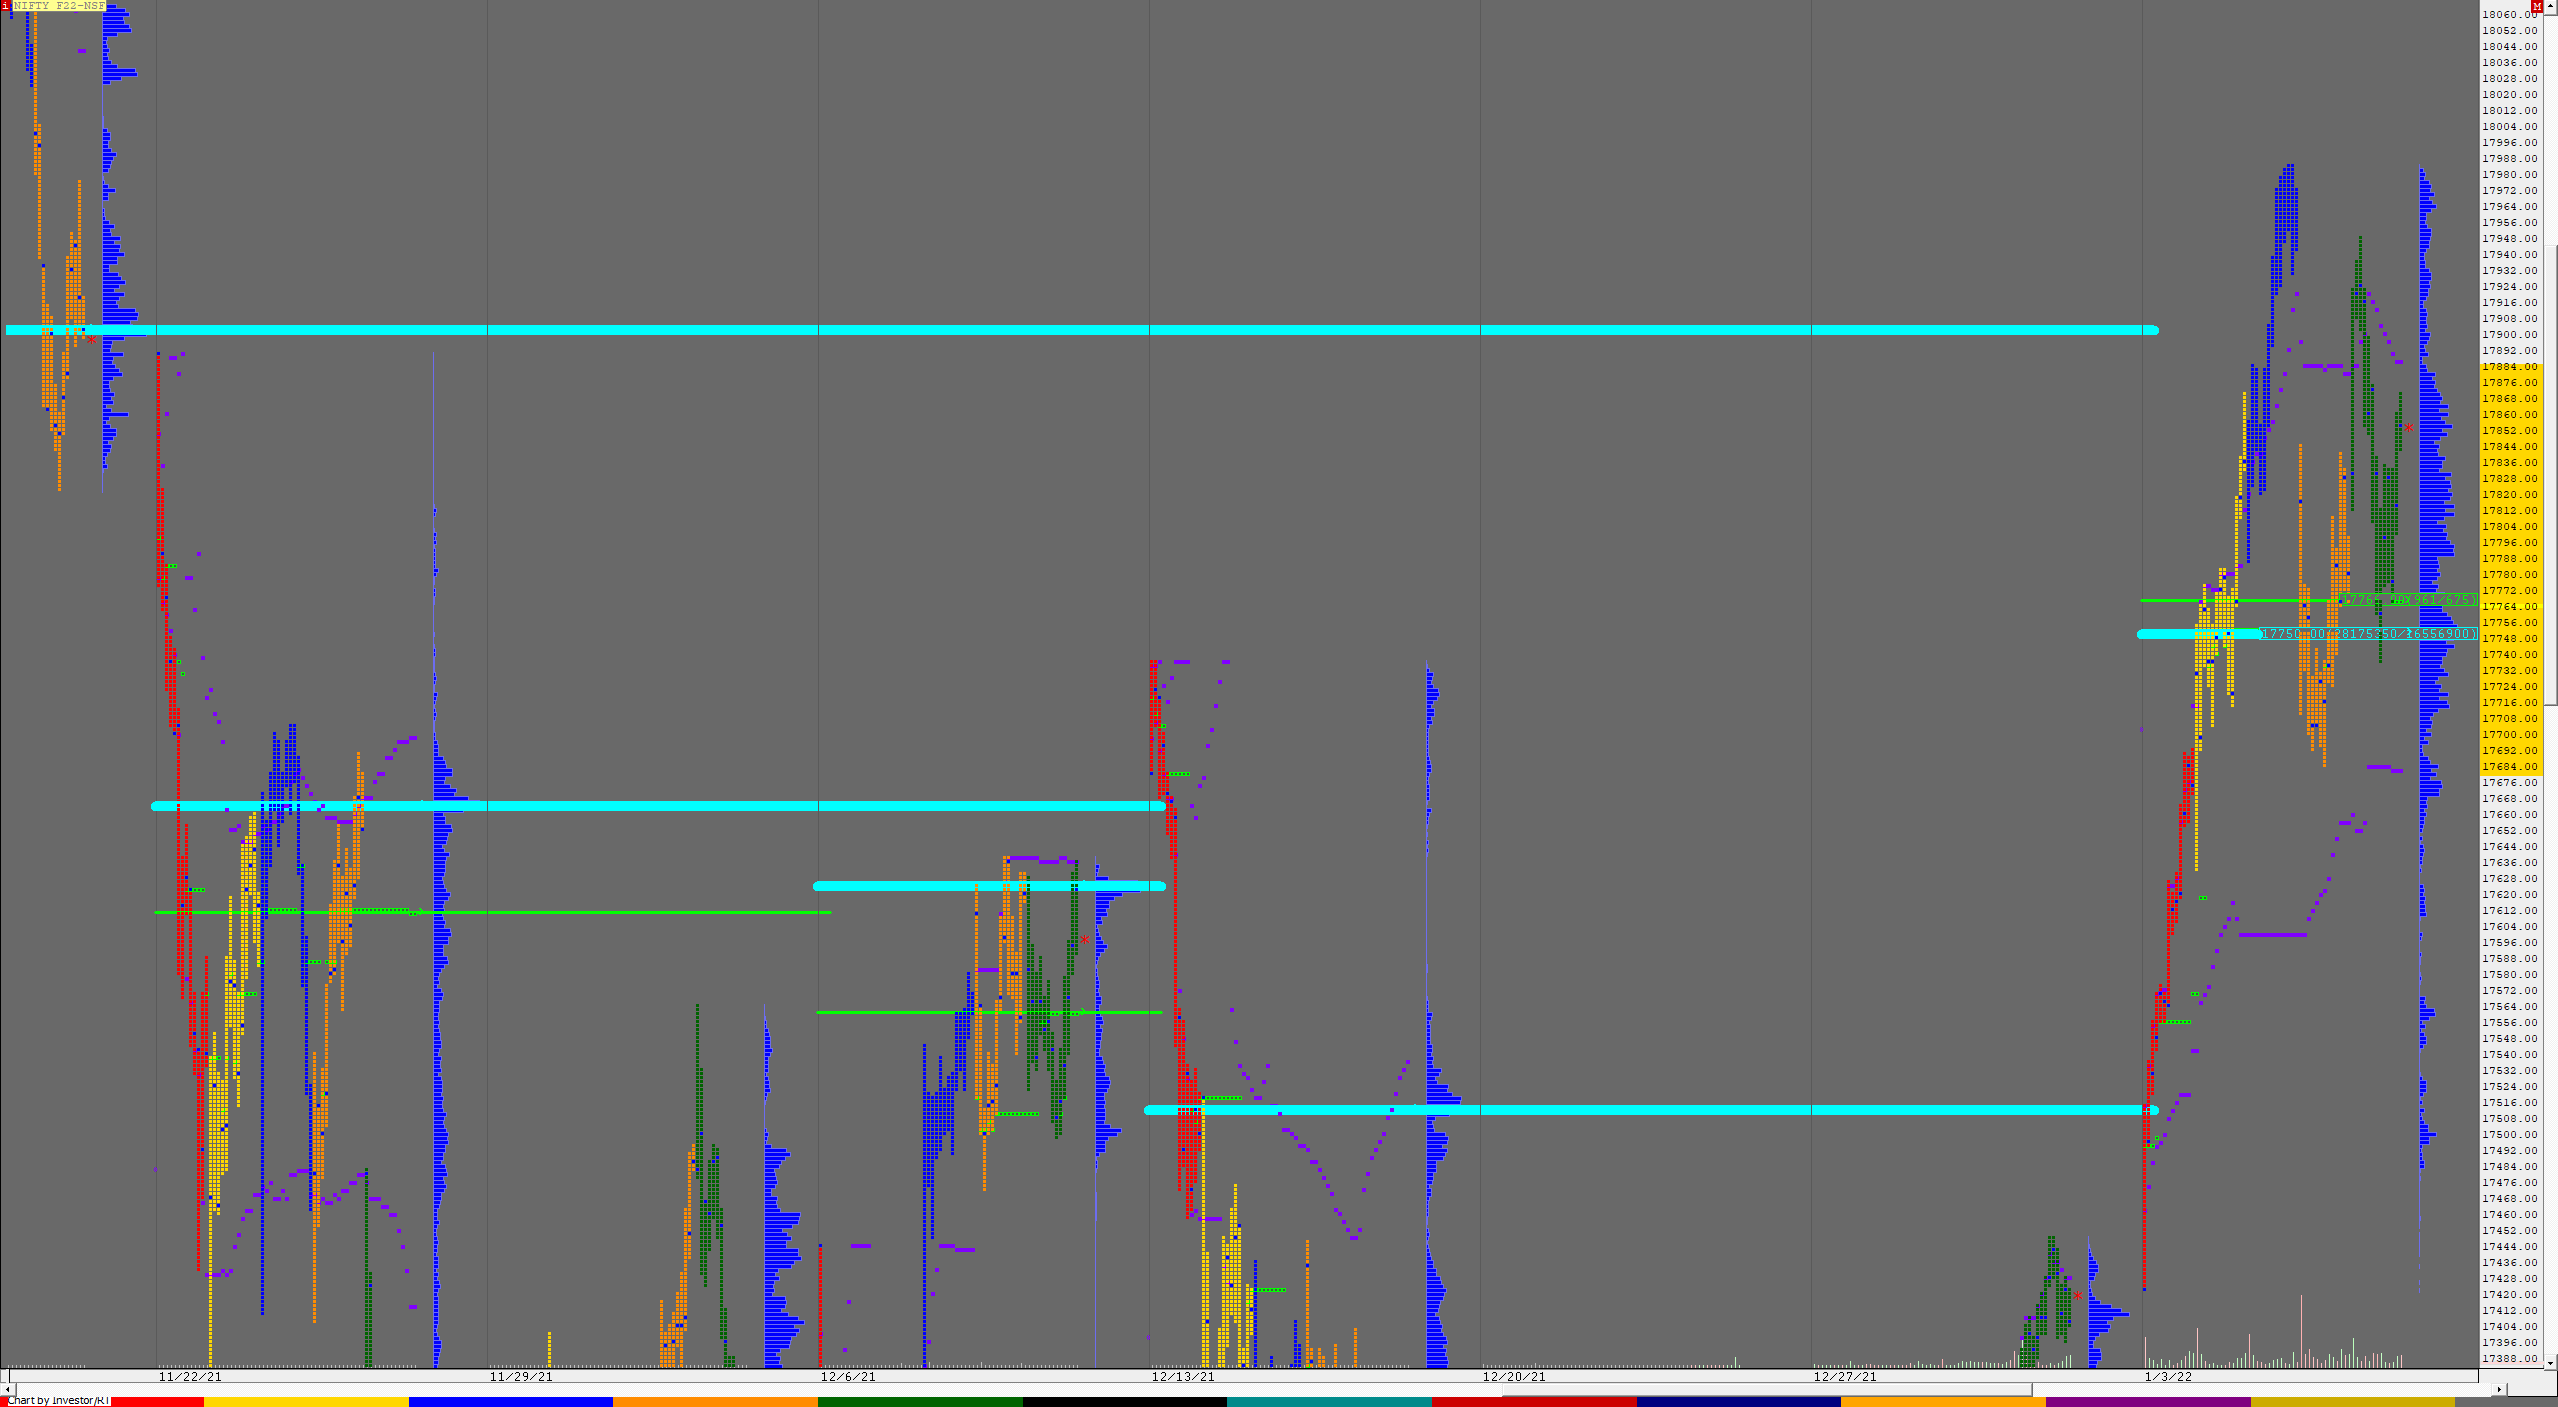 Nf F 1 Weekly Charts (03Rd To 07Th Jan 2022) And Market Profile Analysis Banknifty Futures, Charts, Day Trading, Intraday Trading, Intraday Trading Strategies, Market Profile, Market Profile Trading Strategies, Nifty Futures, Order Flow Analysis, Support And Resistance, Technical Analysis, Trading Strategies, Volume Profile Trading